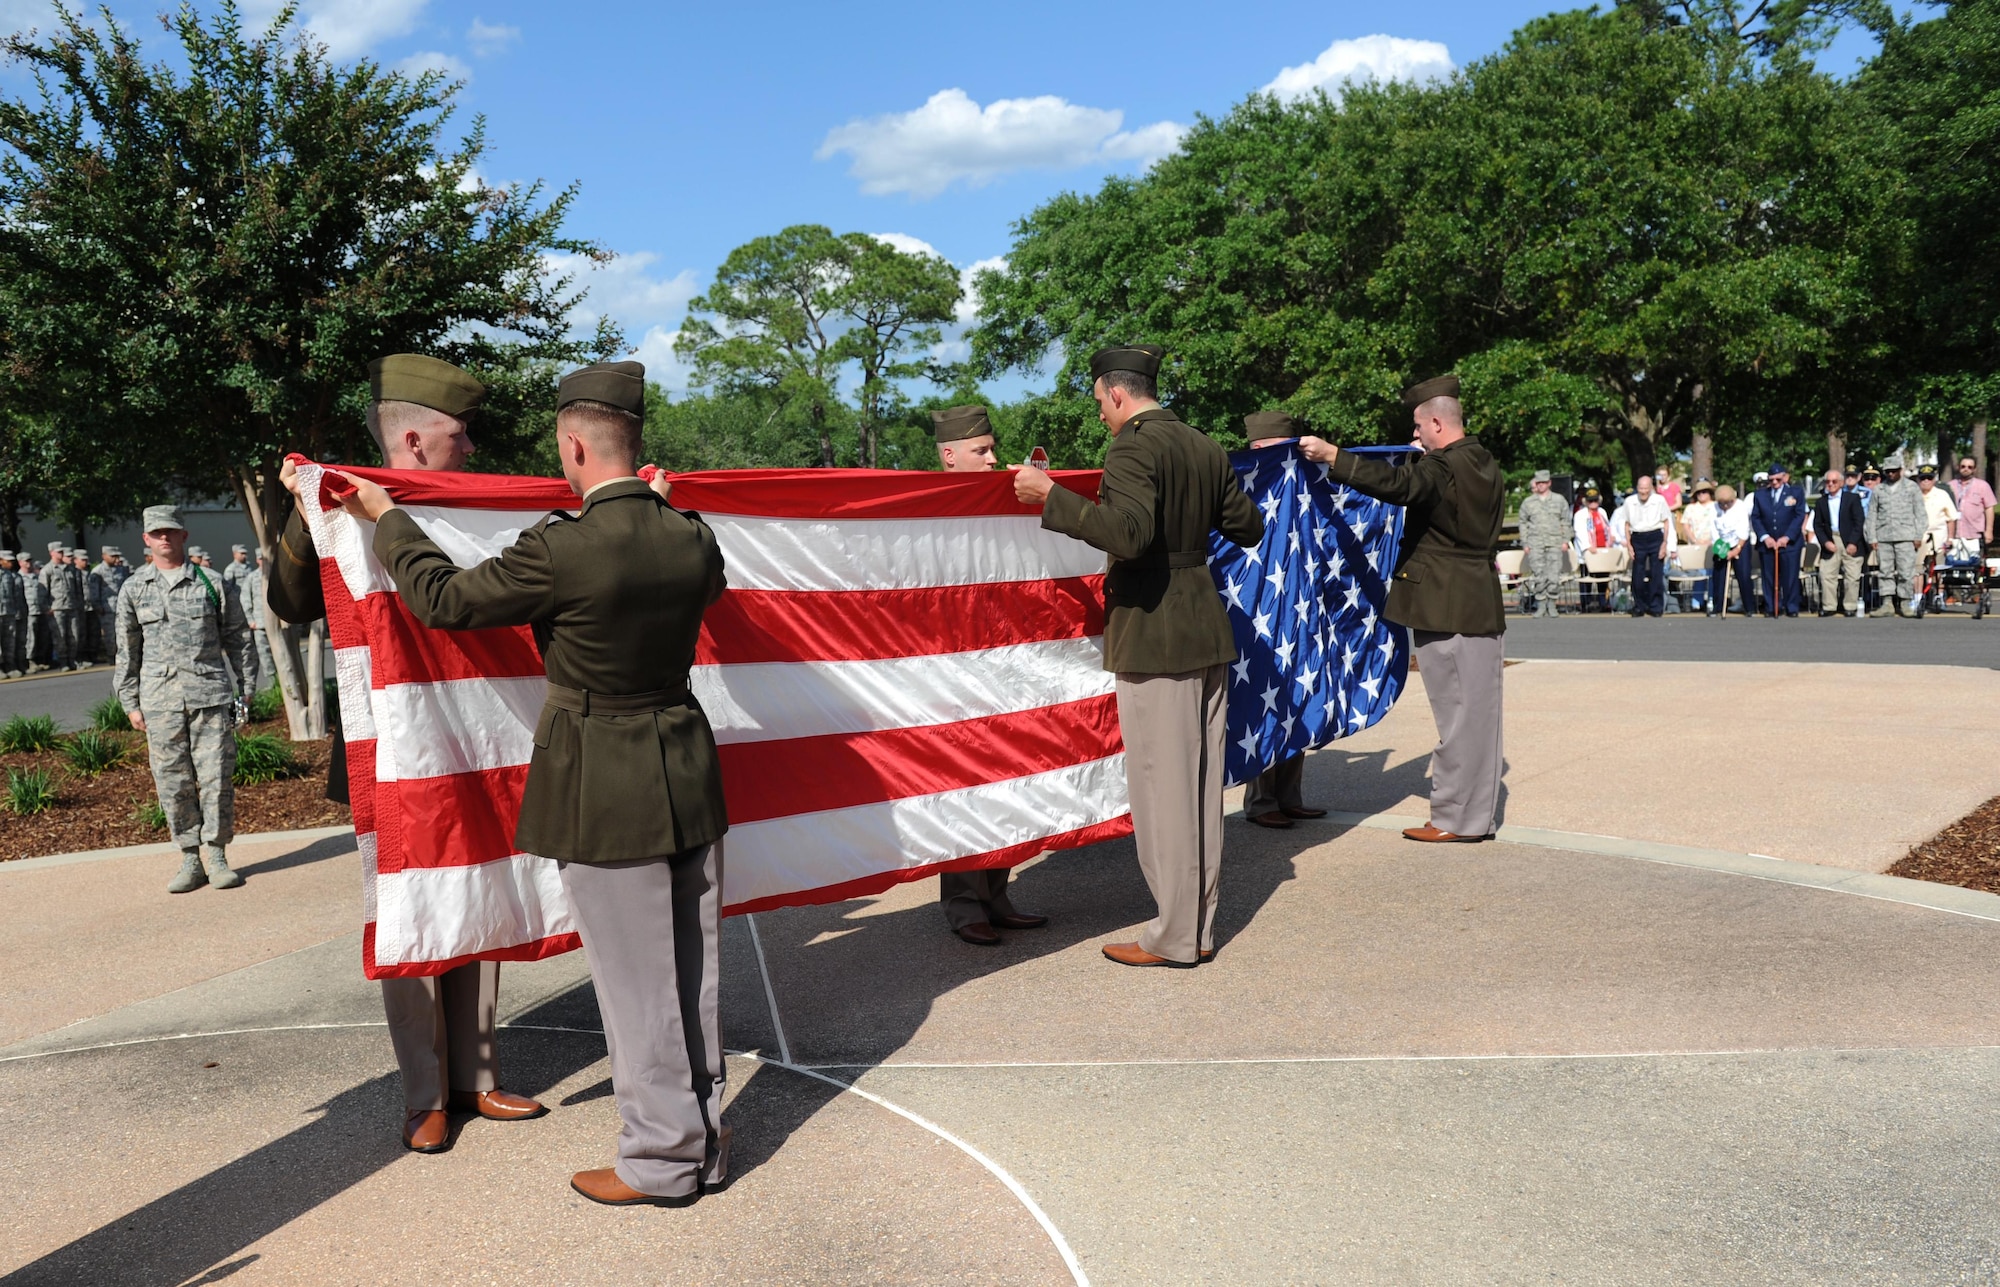 81st Security Forces Squadron Combat Arms Training and Maintenance members fold the U.S. flag during the Lt. Samuel Reeves Keesler, Jr. Memorial Retreat Ceremony May 13, 2016, Keesler Air Force Base, Miss. The event was held in honor of Lt. Keesler’s date of entry into the Army Air Service 99 years ago. The retreat ceremony is part of a year-long celebration of Lt. Keesler, a Mississippi native and WORLD WAR I hero, and the 75th anniversary of the opening of the base. (U.S. Air Force photo by Kemberly Groue)